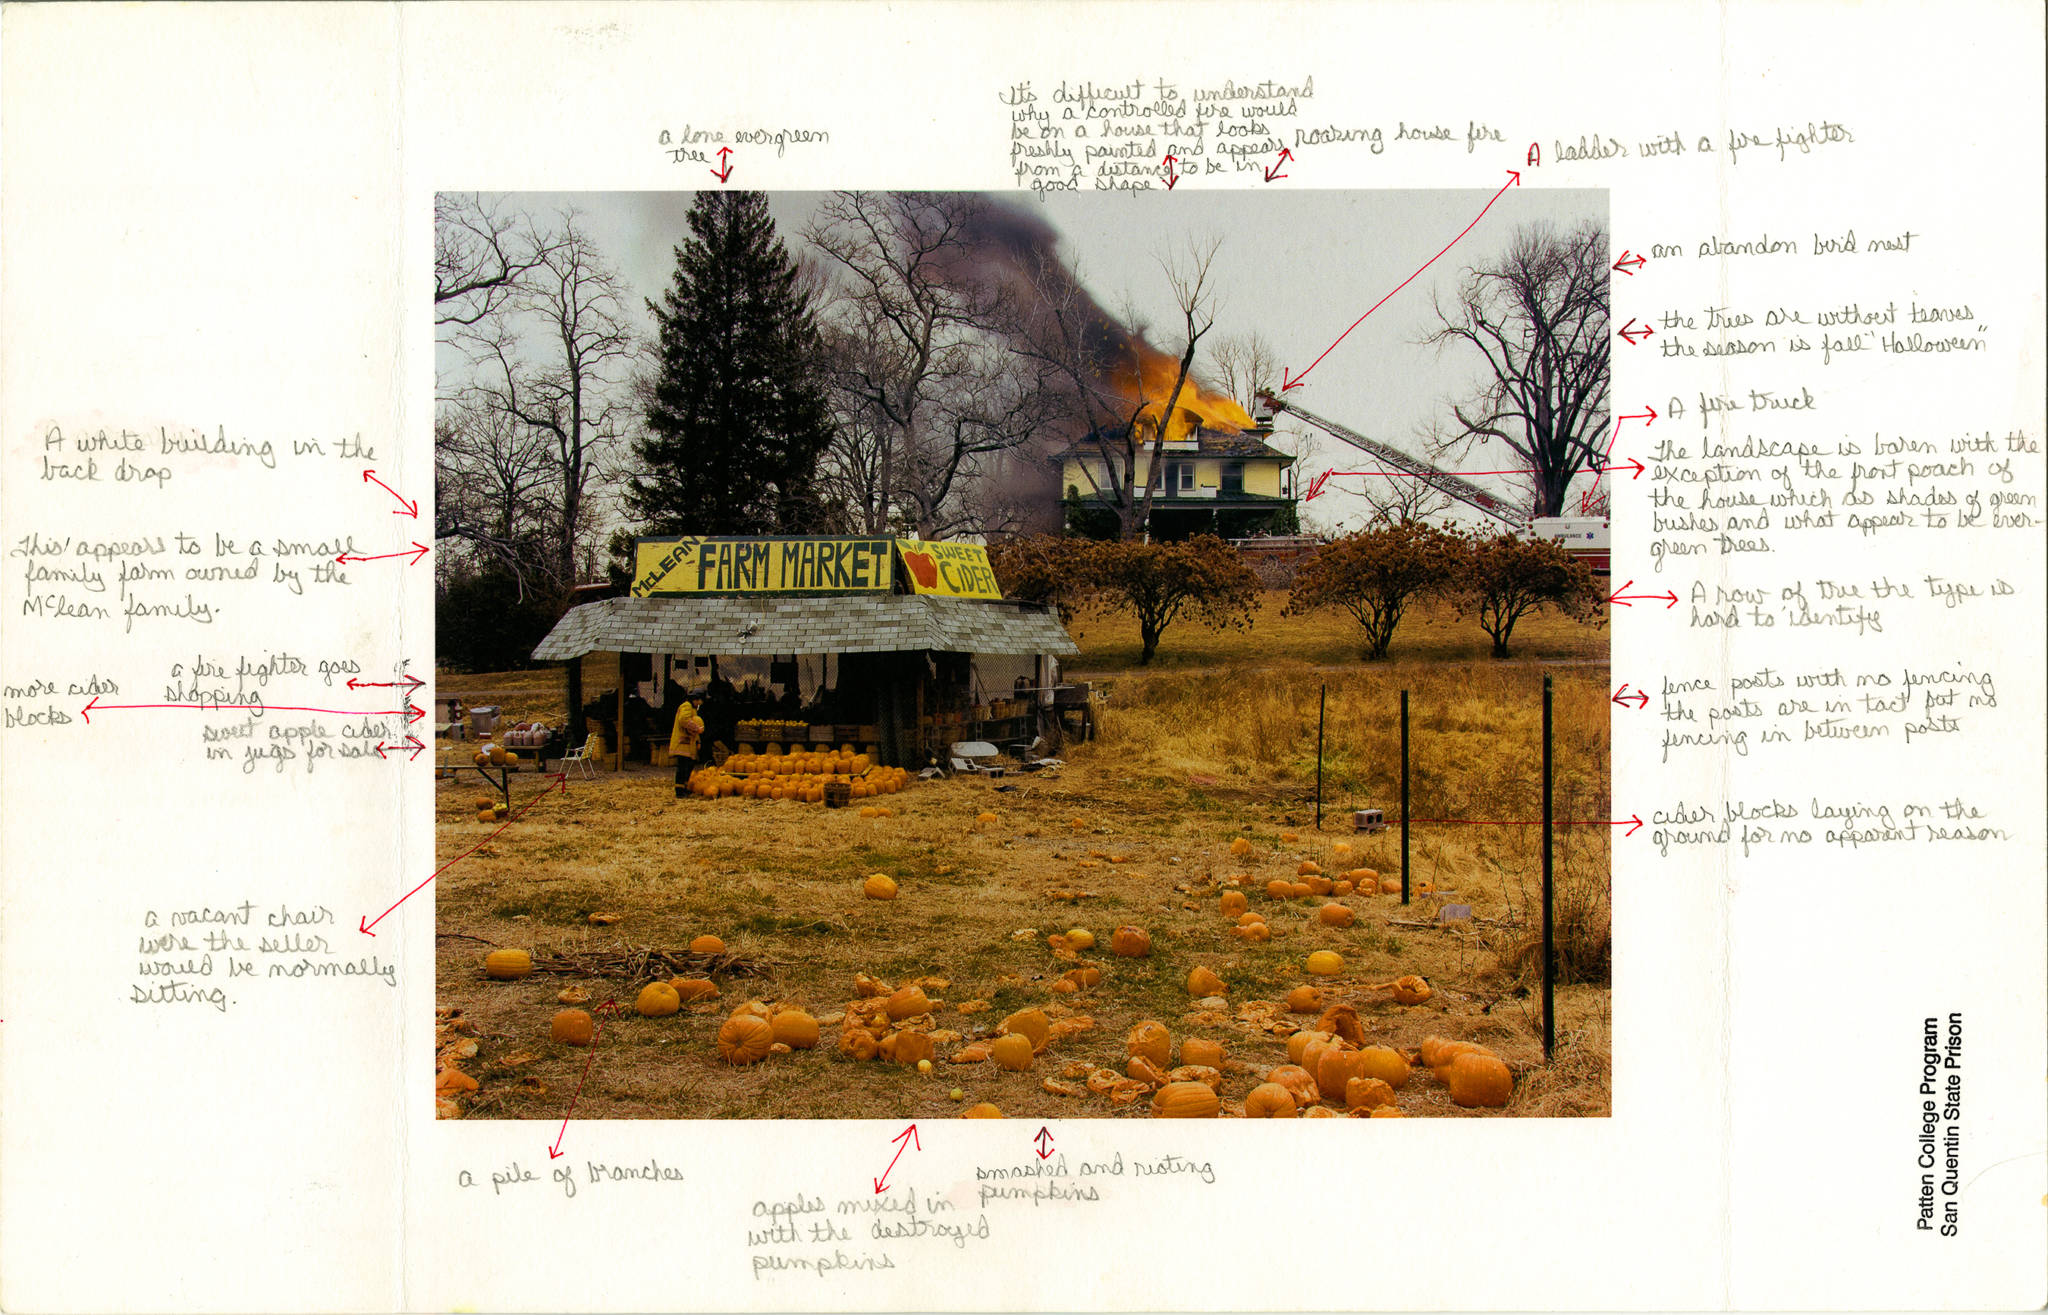 Nigel Poor and Frankie Smith, 'Mapping Joel Sternfeld, side A,' 2011/12. Inkjet print, with ink notations.